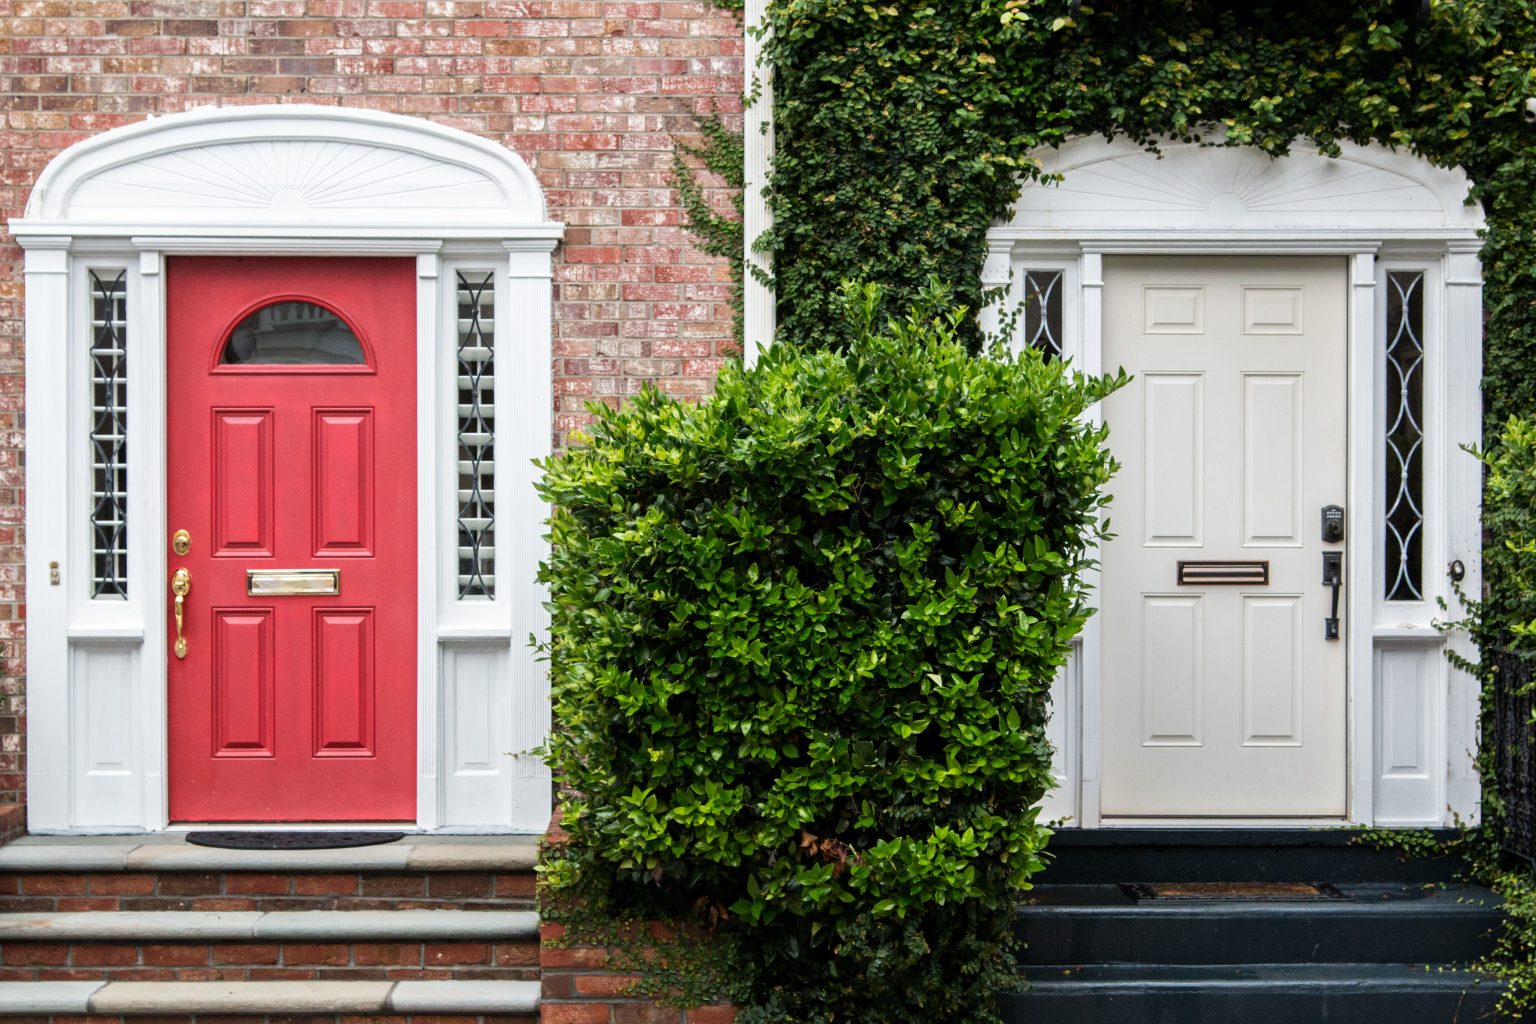 Two adjacent entrances, one with a red door and one with a cream door, both flanked by white framing and brickwork.